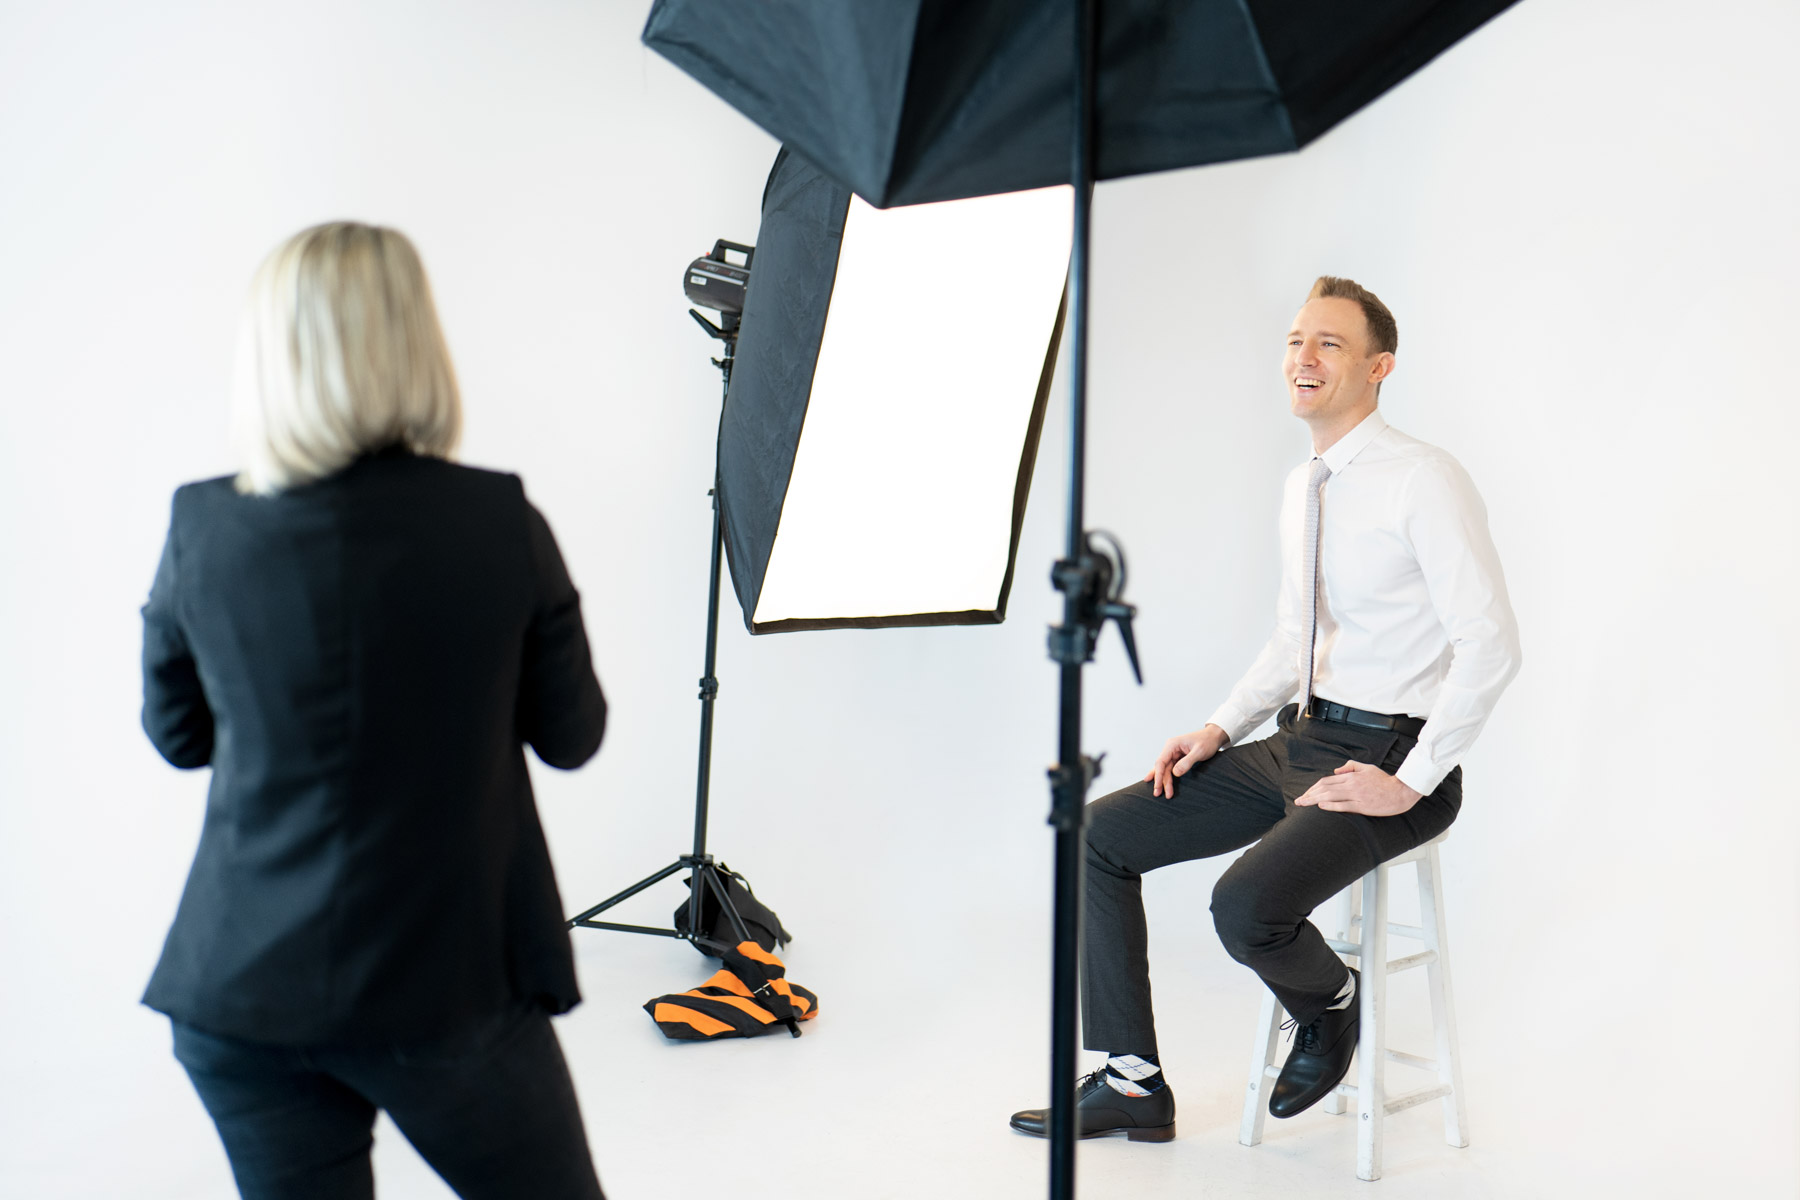 Birmingham corporate headshots backstage image or a man laughing while being photographed